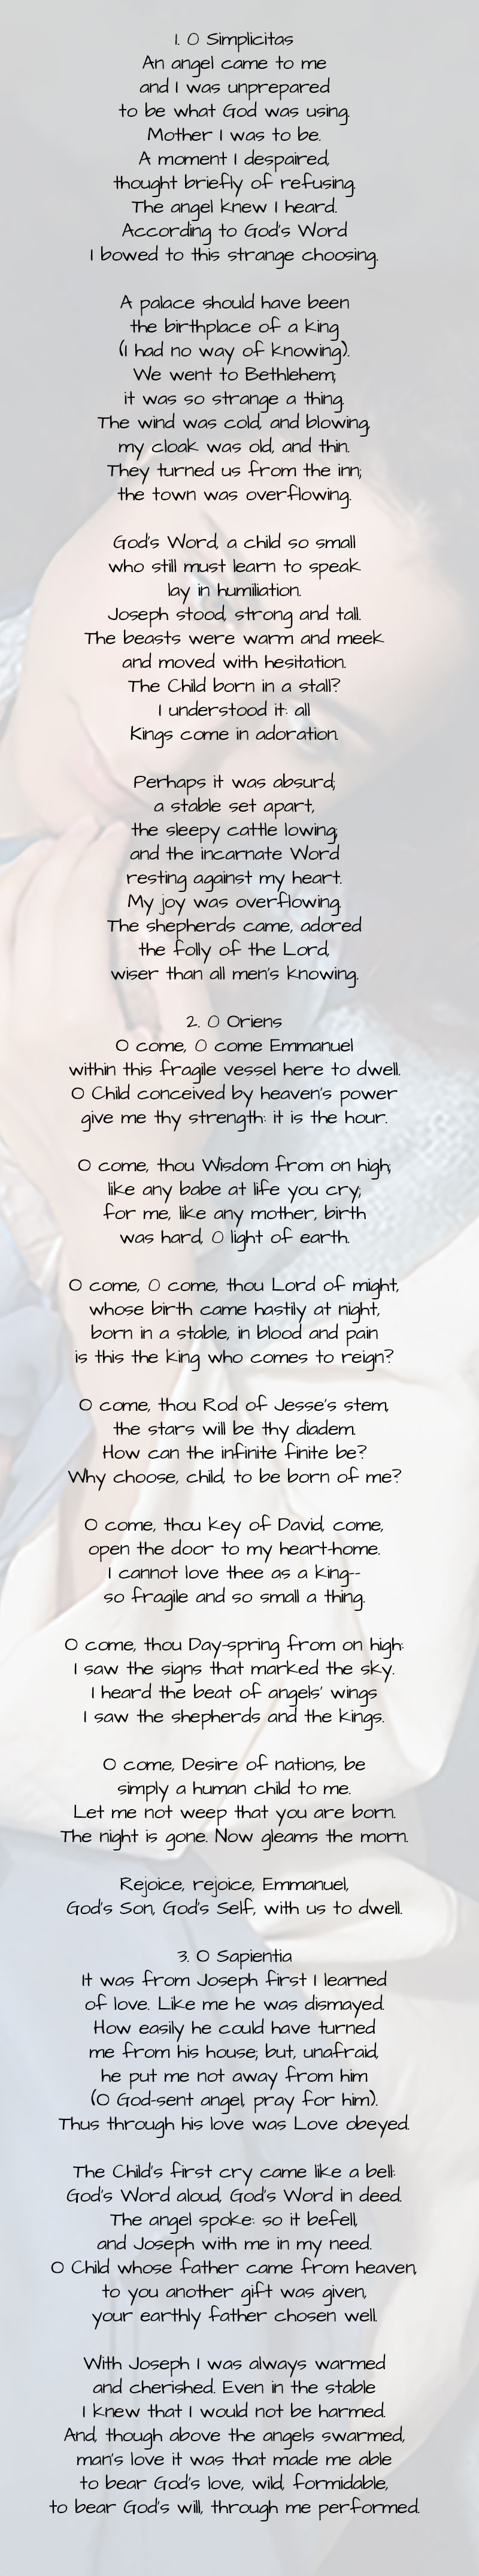 Christmas Poems Three Songs of Mary 2